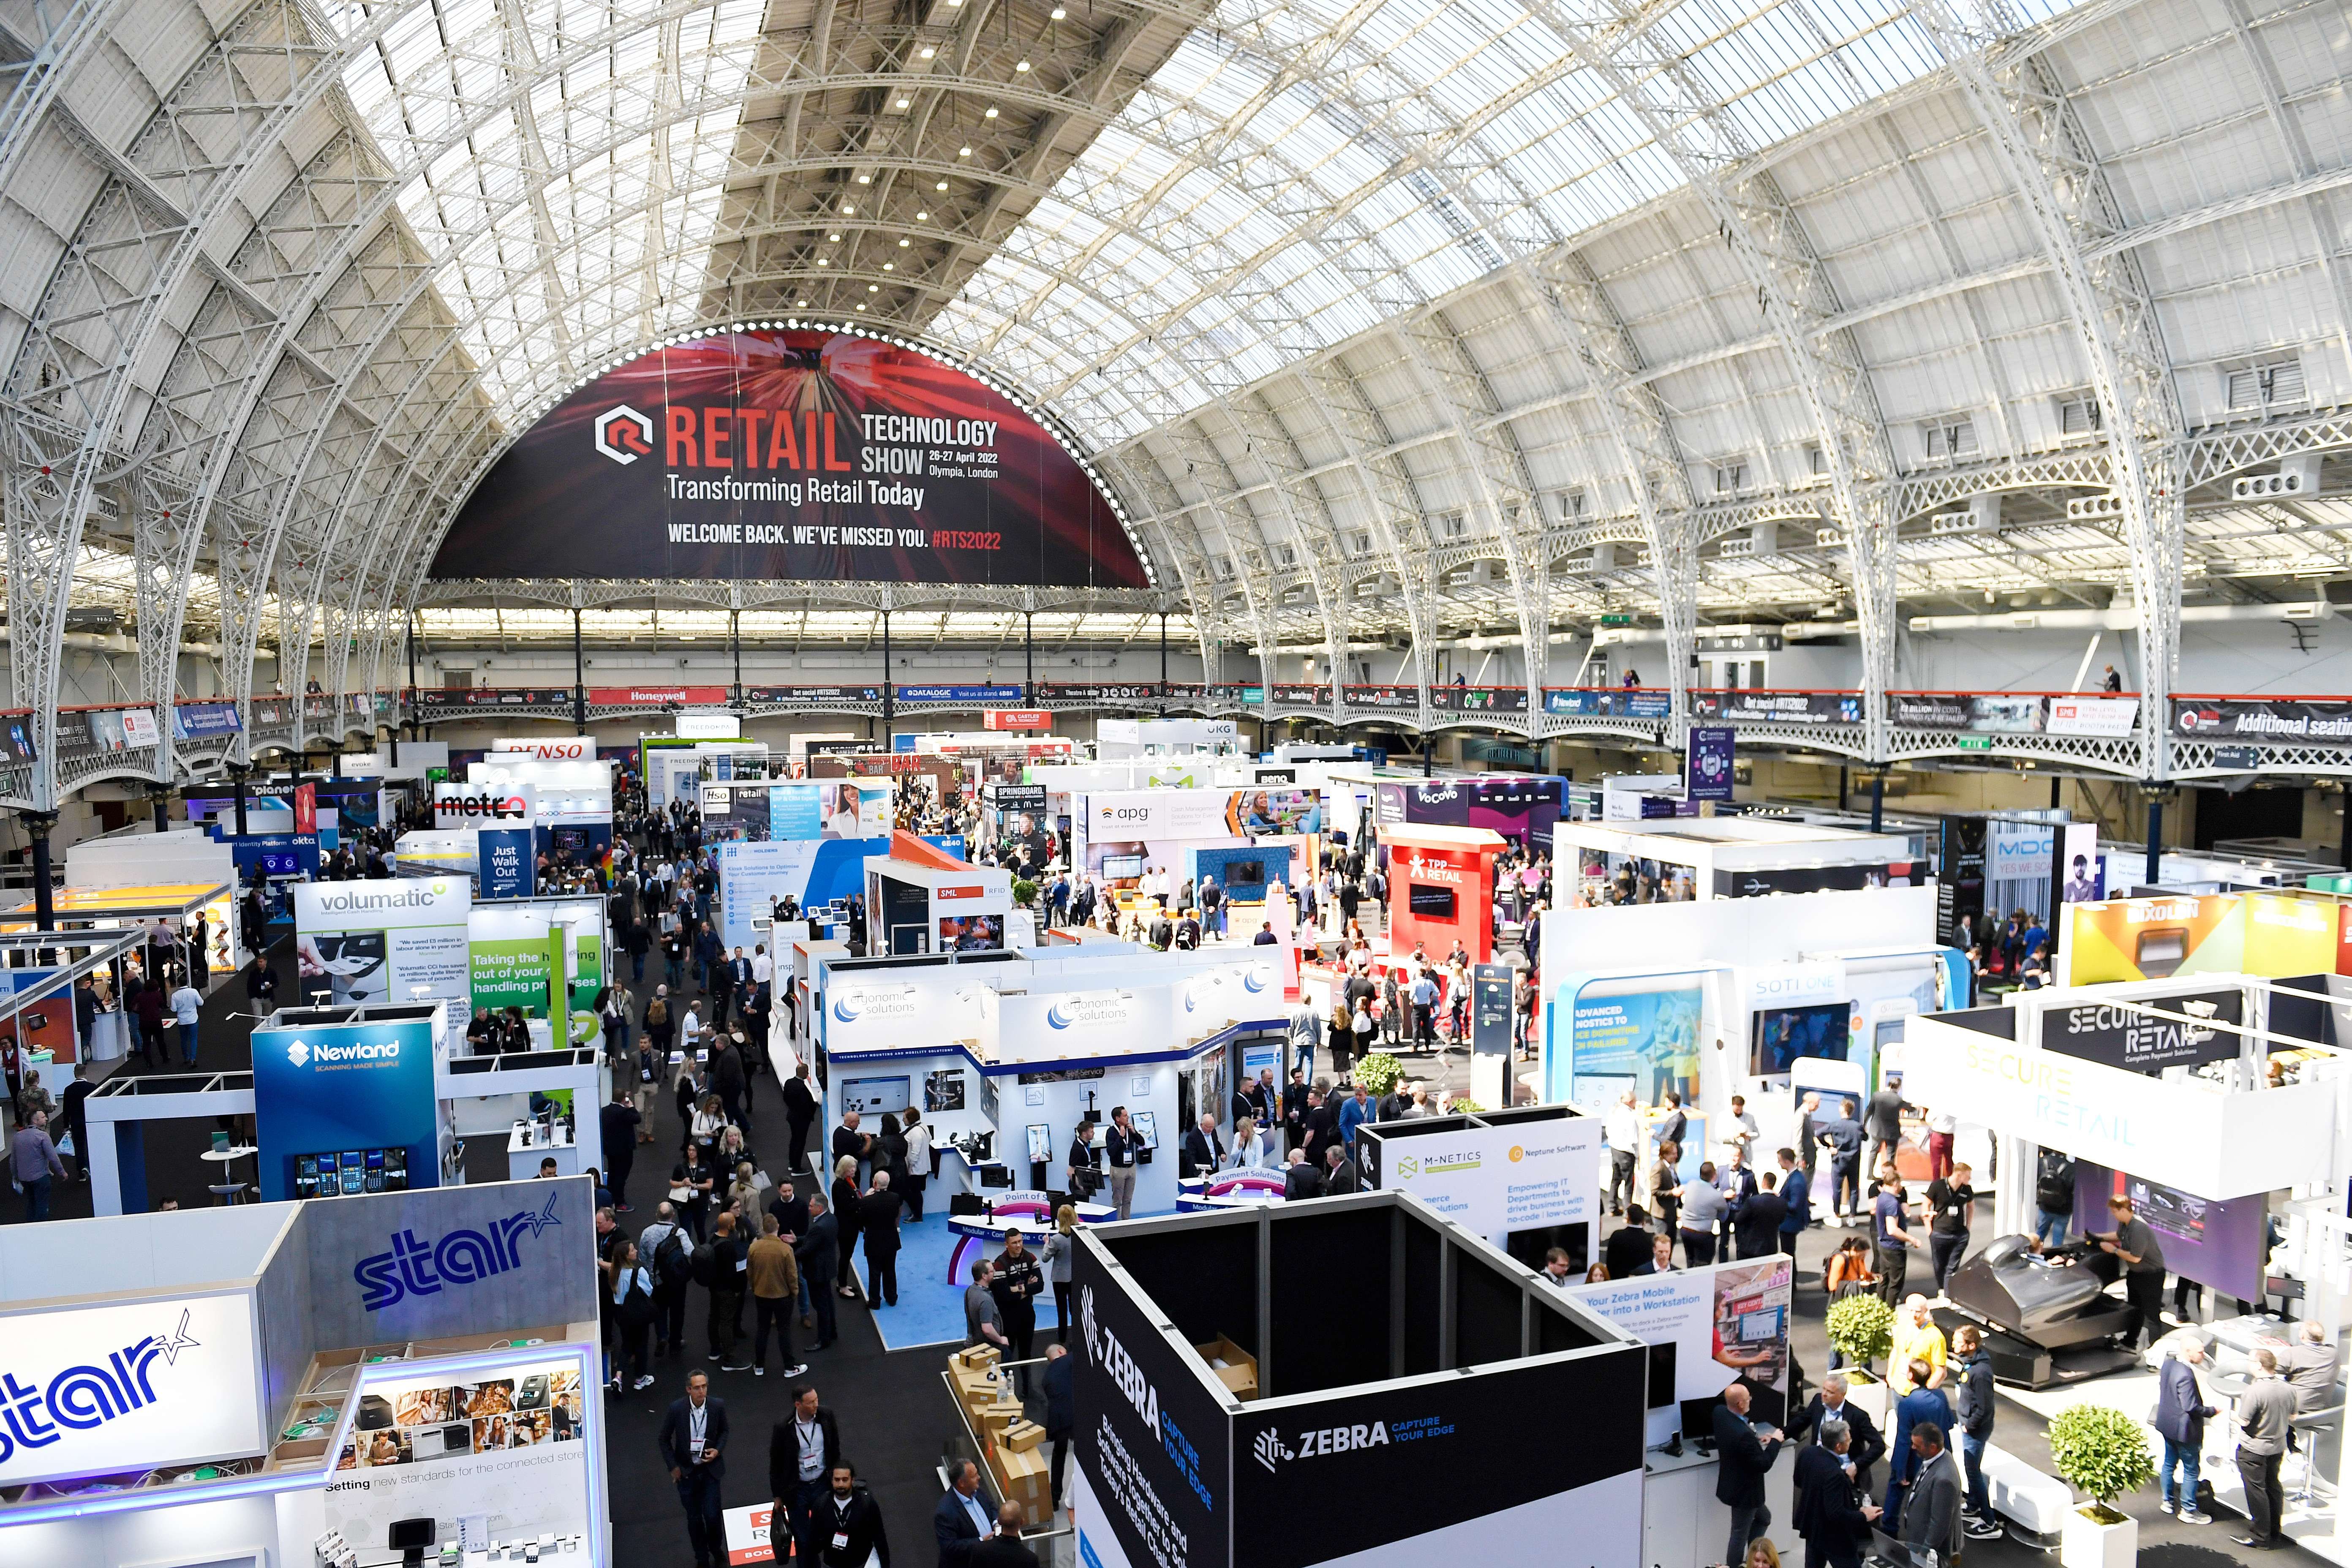 Retail Technology Show 